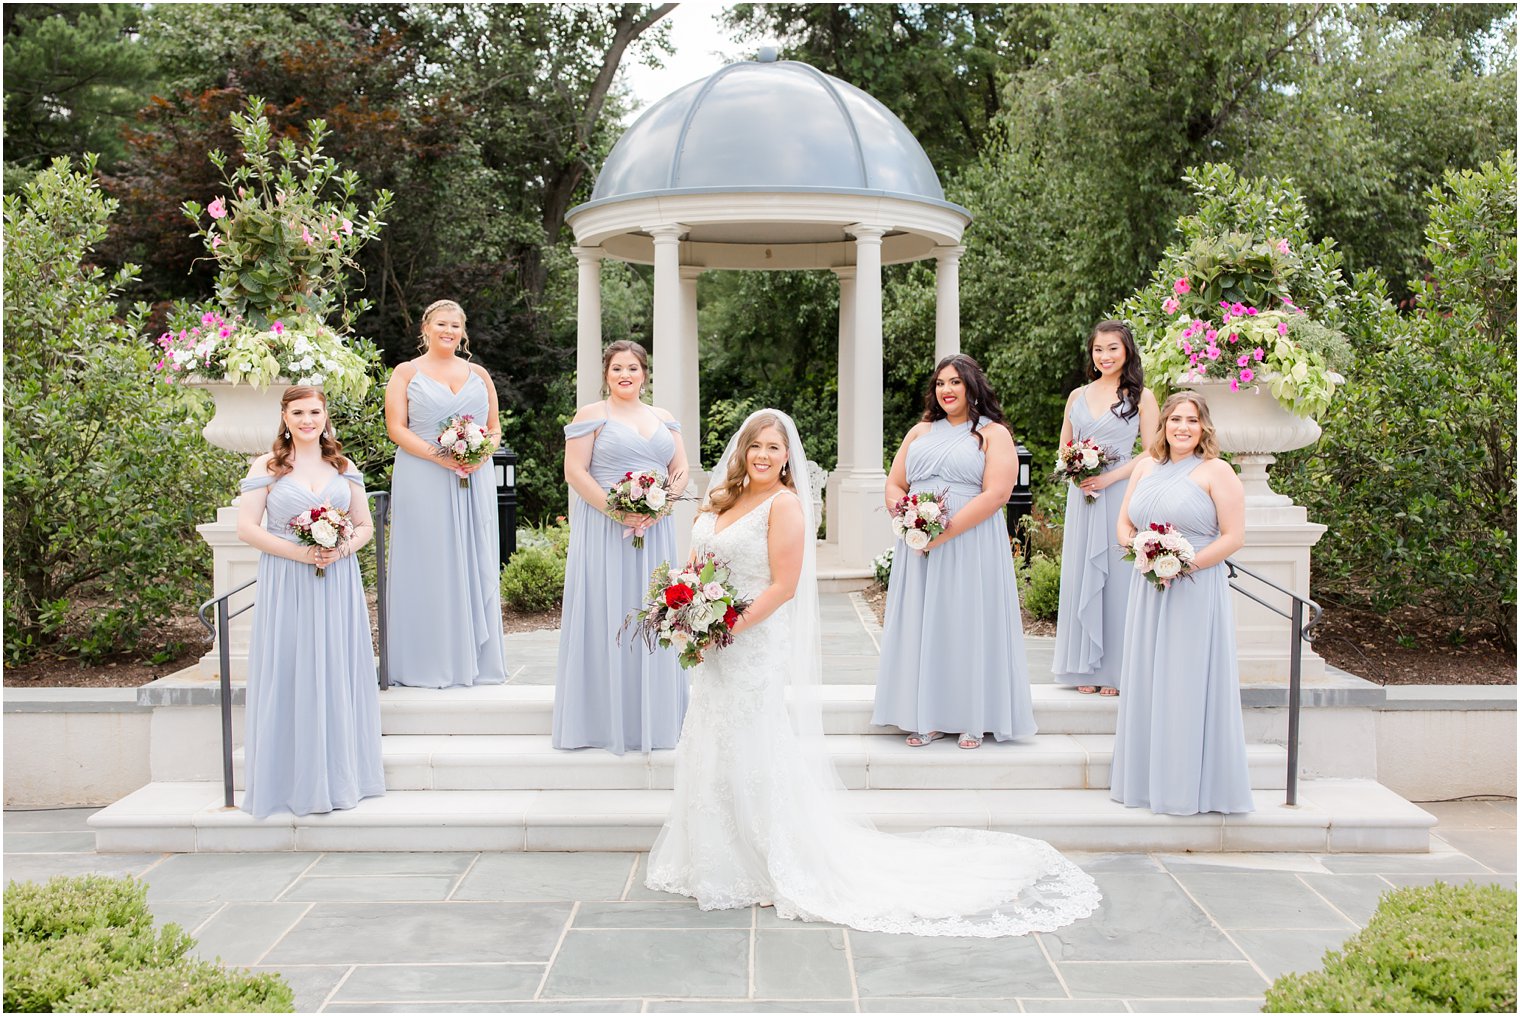 Bridesmaids posing for photos in Park Chateau Gardens